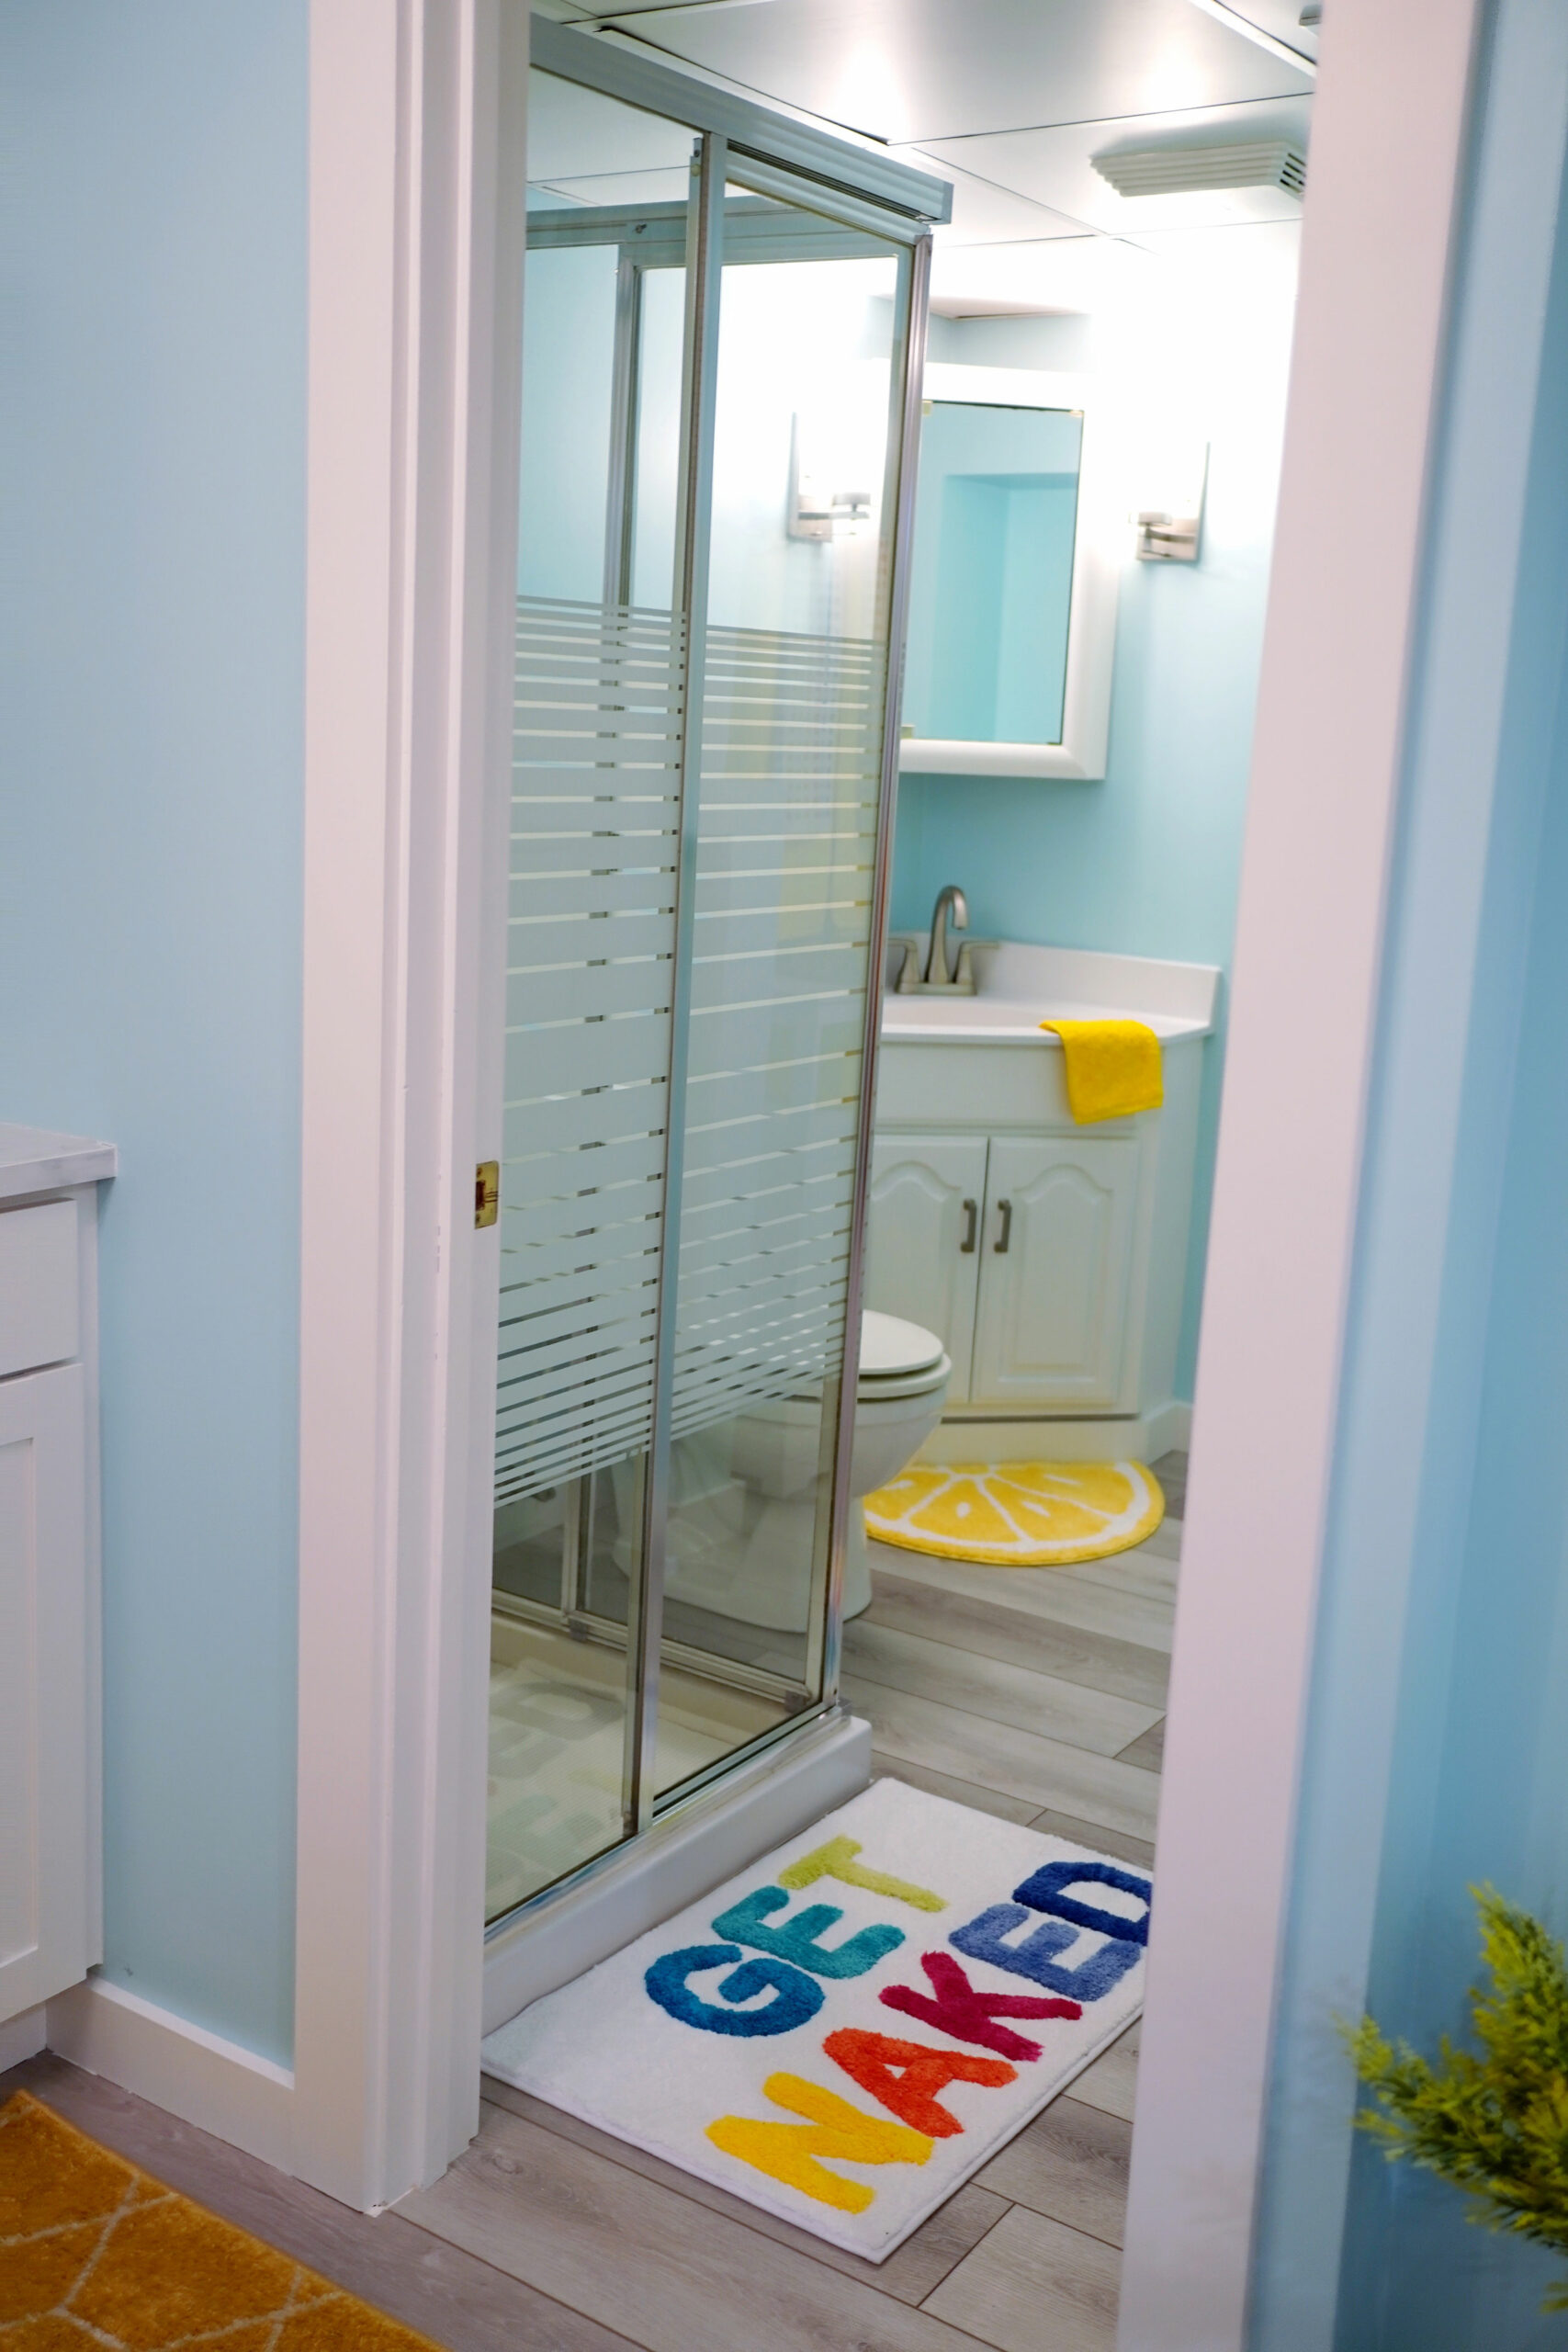 The bathroom was dark and dingy. (That linoleum, though!) So, new vinyl plank flooring immediately brightened it up, with new bathroom hardware and touches of lemon yellow to add joy on a tight budget.